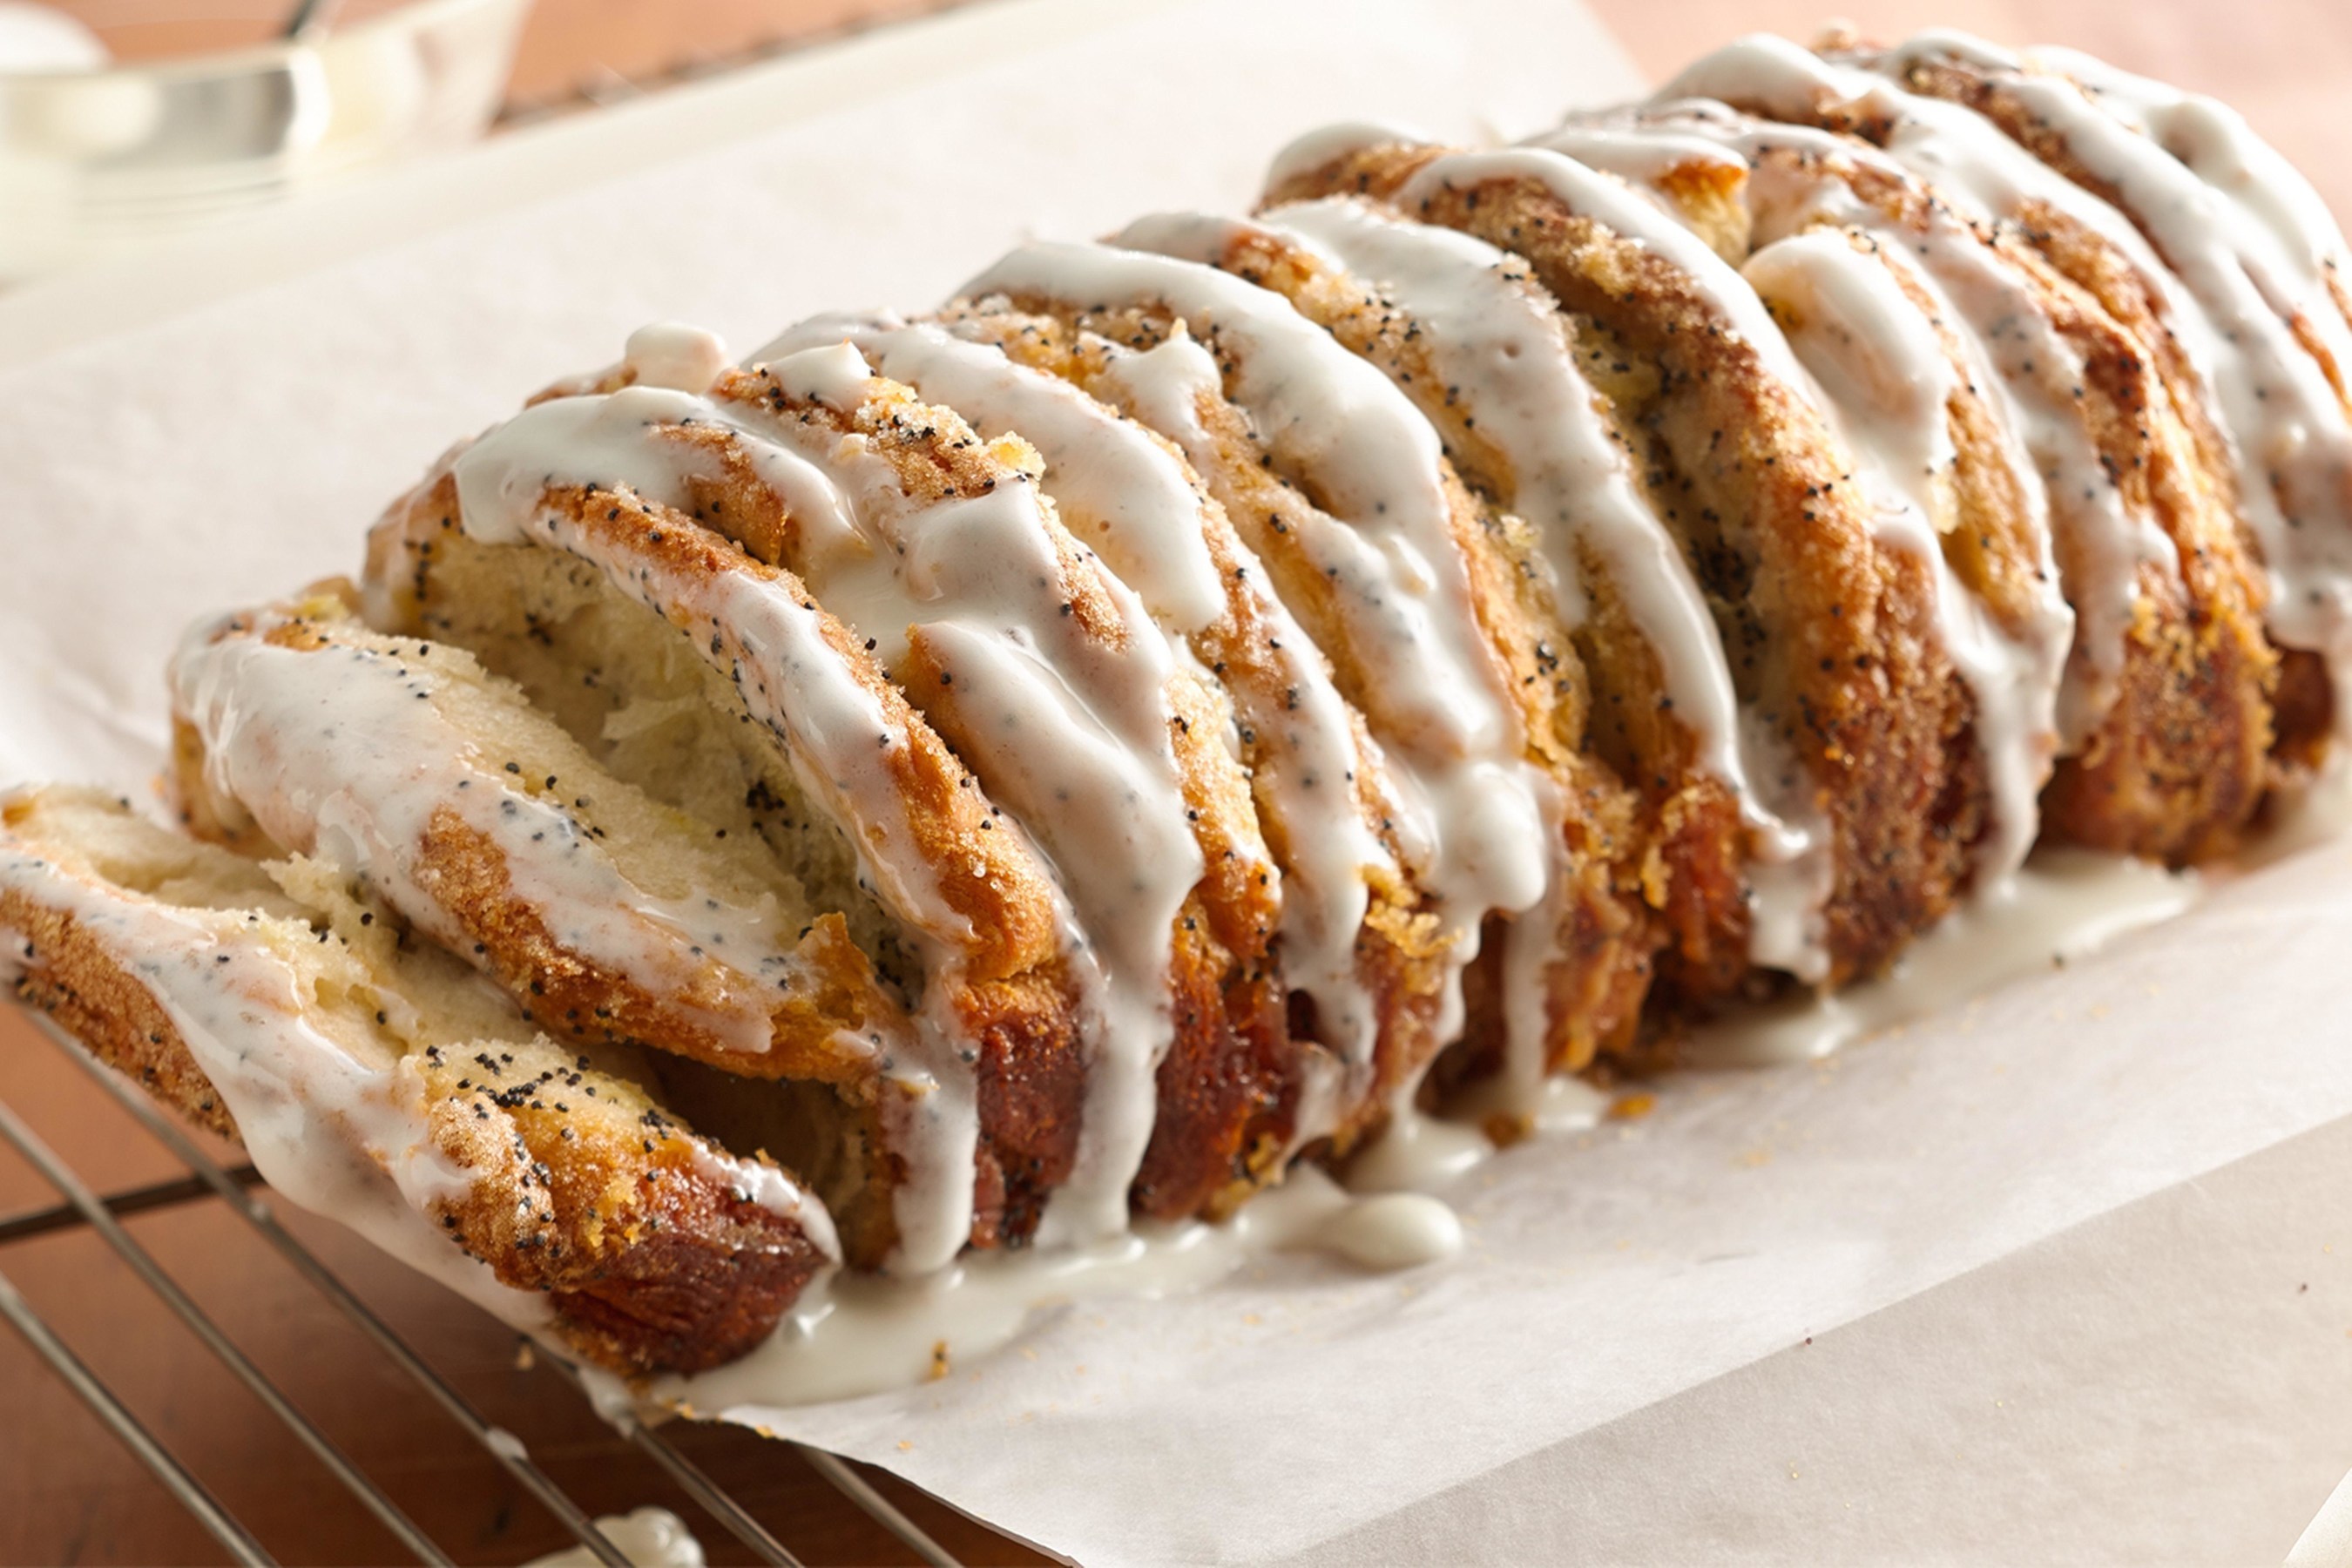 Lemon-Poppy Seed Pull-Apart Bread, an original recipe by Cathy Wiechert of Mound, Minn., will compete for the $1 million grand prize at the 47th Pillsbury Bake-Off(R) Contest in Nashville, Tenn. on November 3, 2014. To view all 100 recipes competing in this year's Contest, go to BakeOff.com.